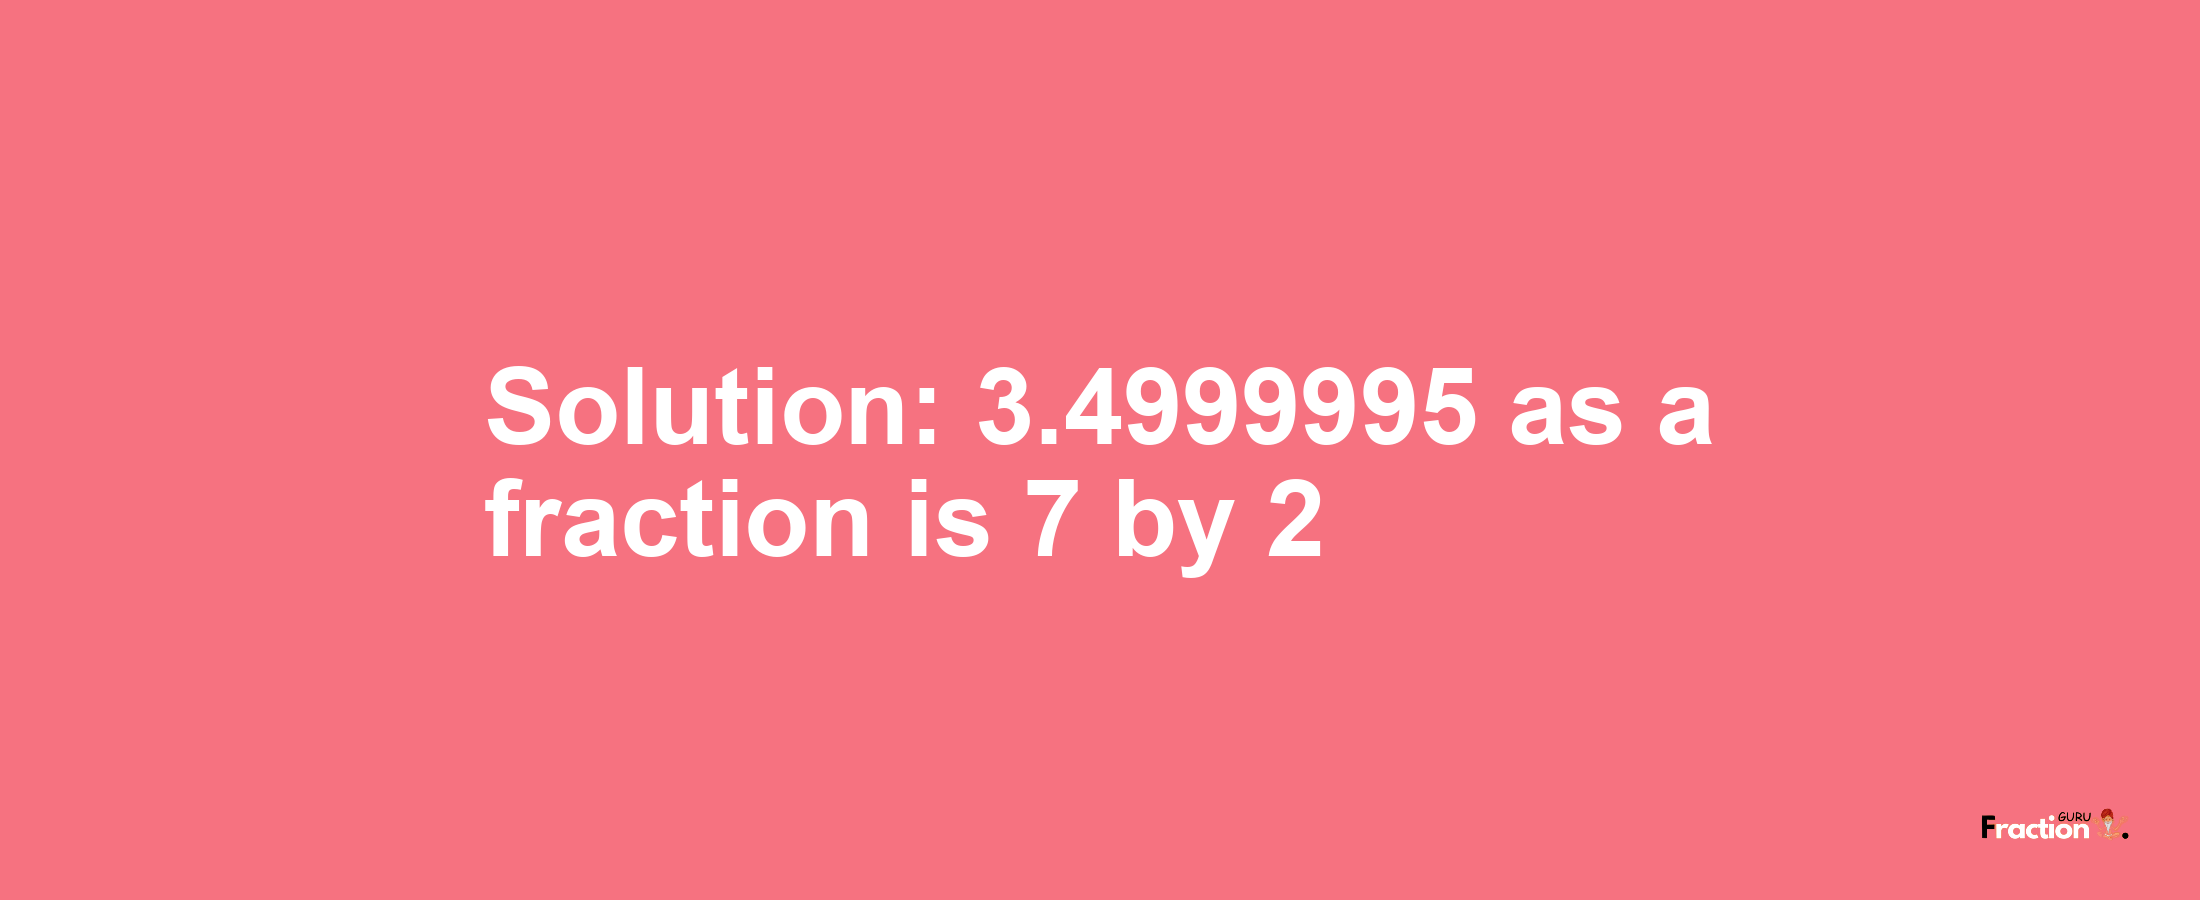 Solution:3.4999995 as a fraction is 7/2